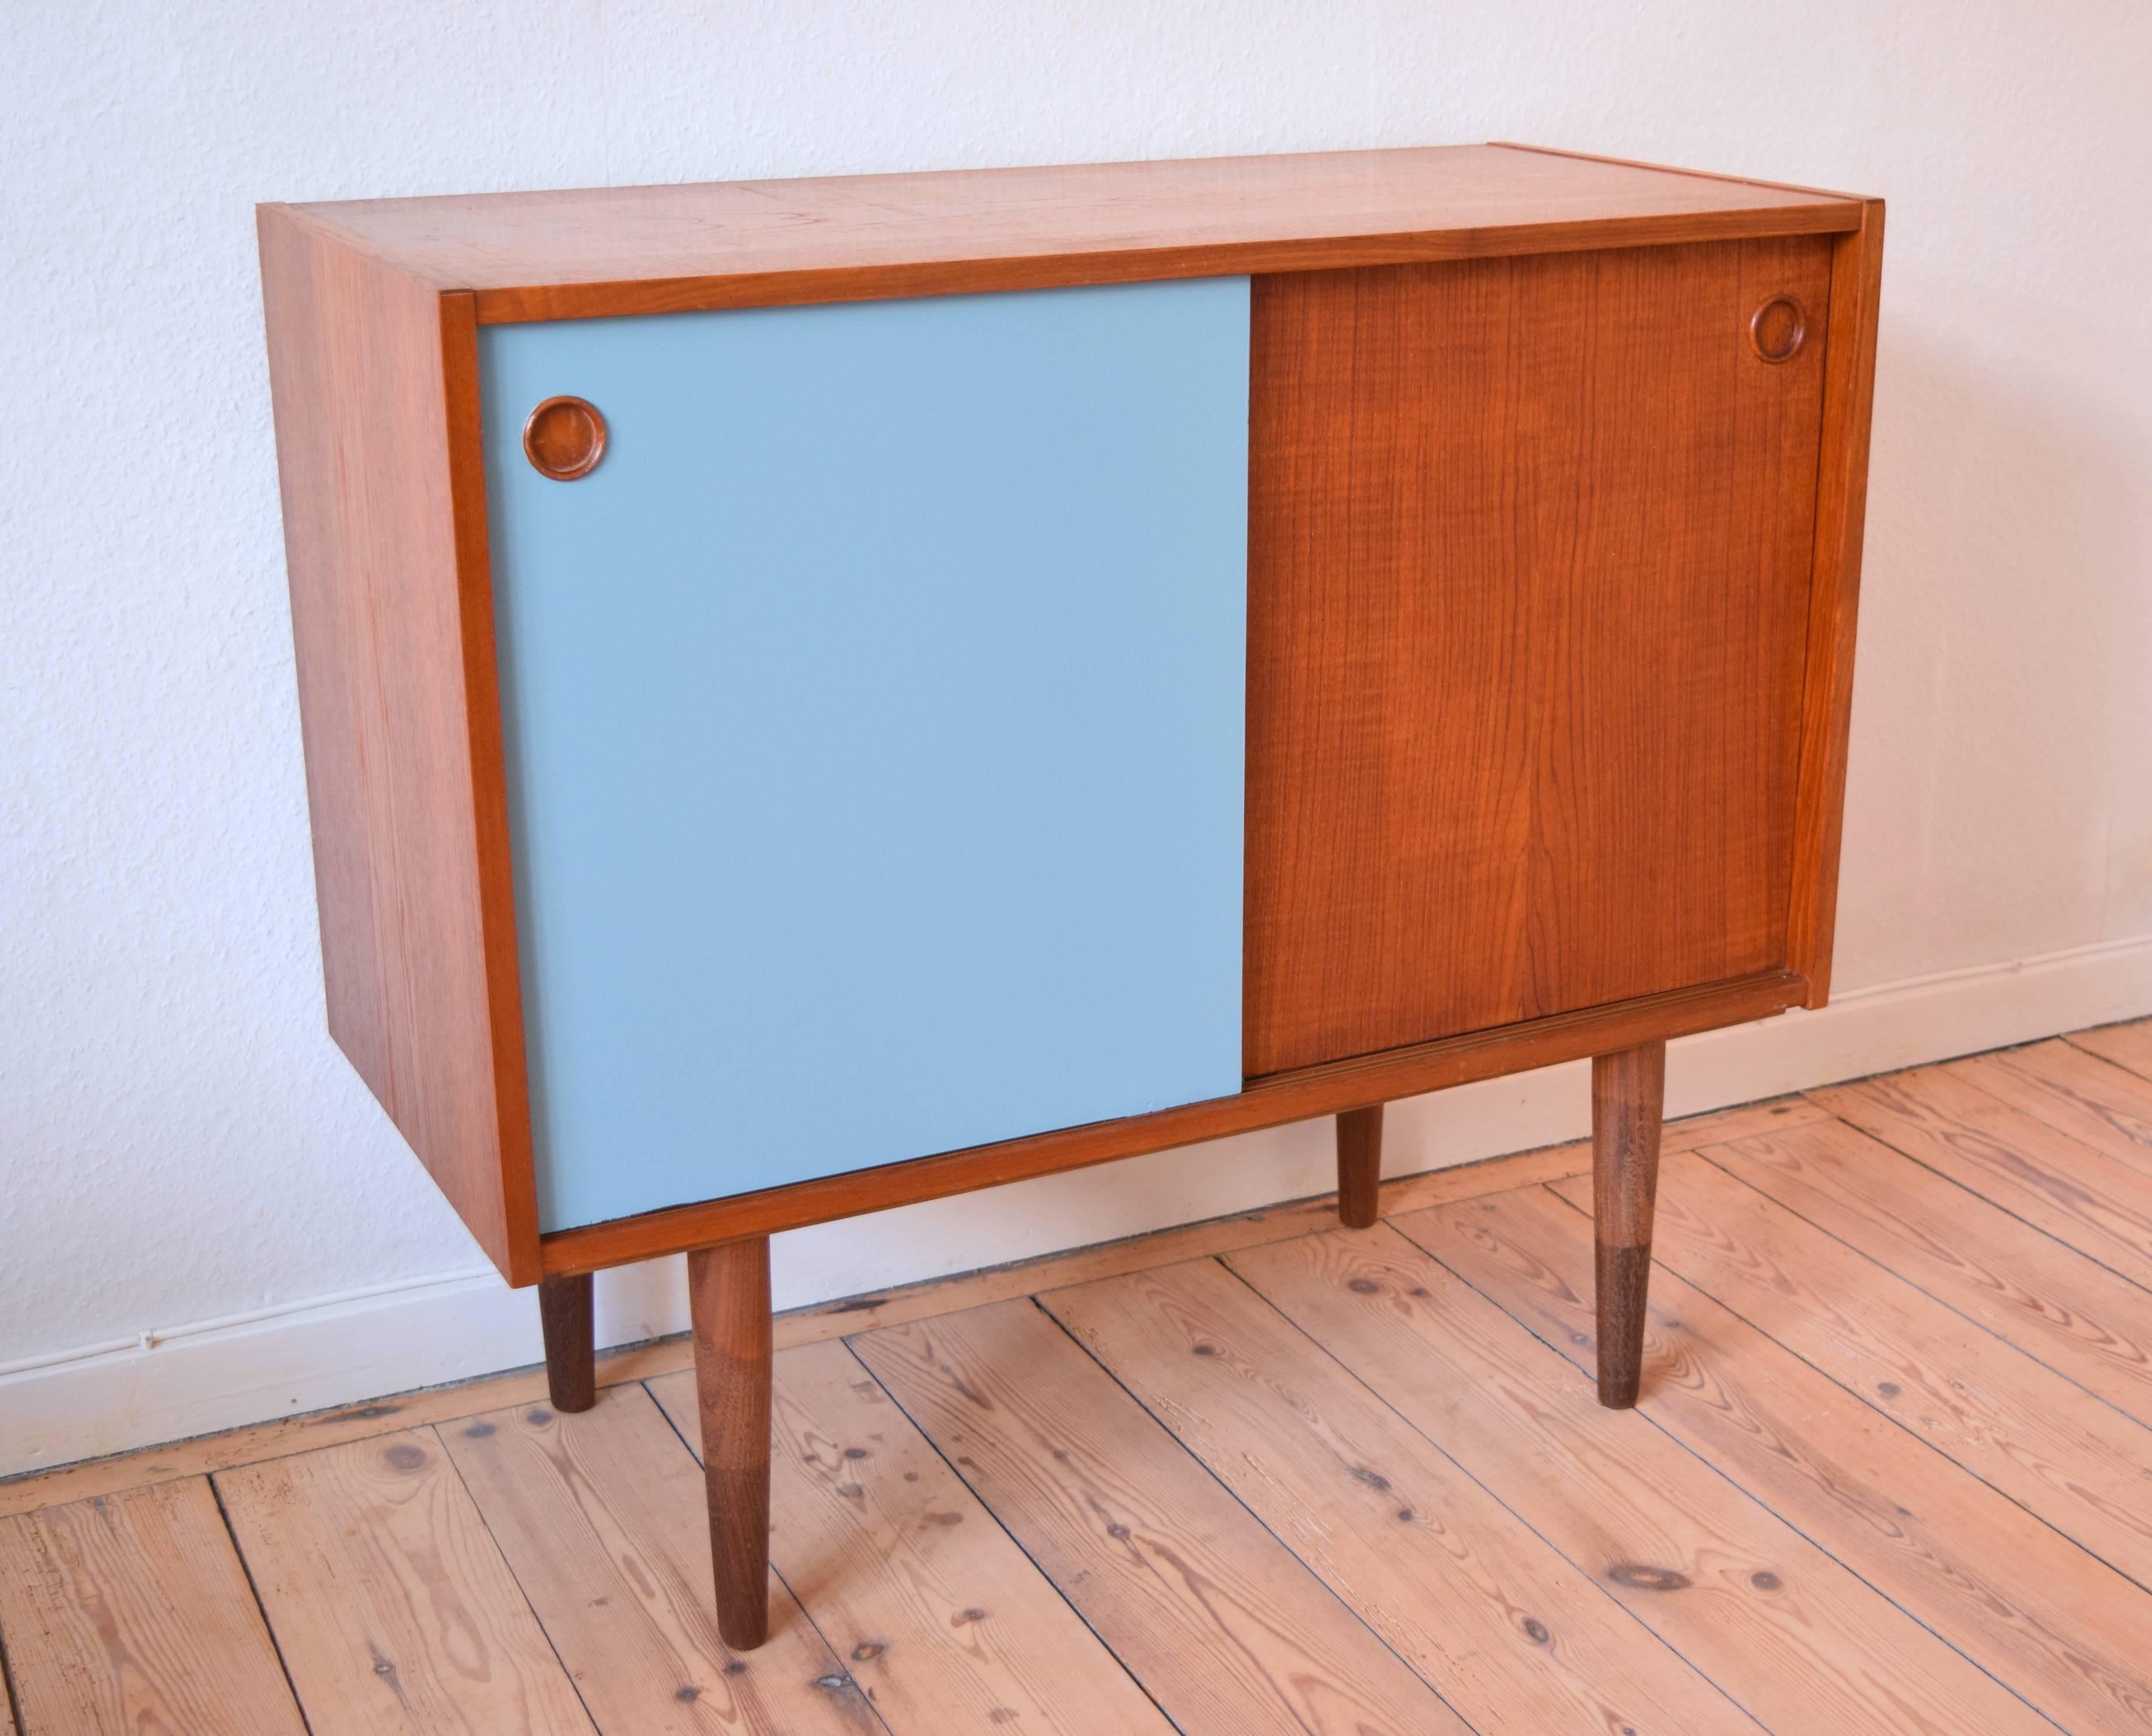 1960s teak sideboard with sliding doors. Features one teak and one painted door. Sits on turned and tapered two-tone solid teak legs. Apart from a few small marks here and there commensurate with age and usage, this piece is in a good condition.